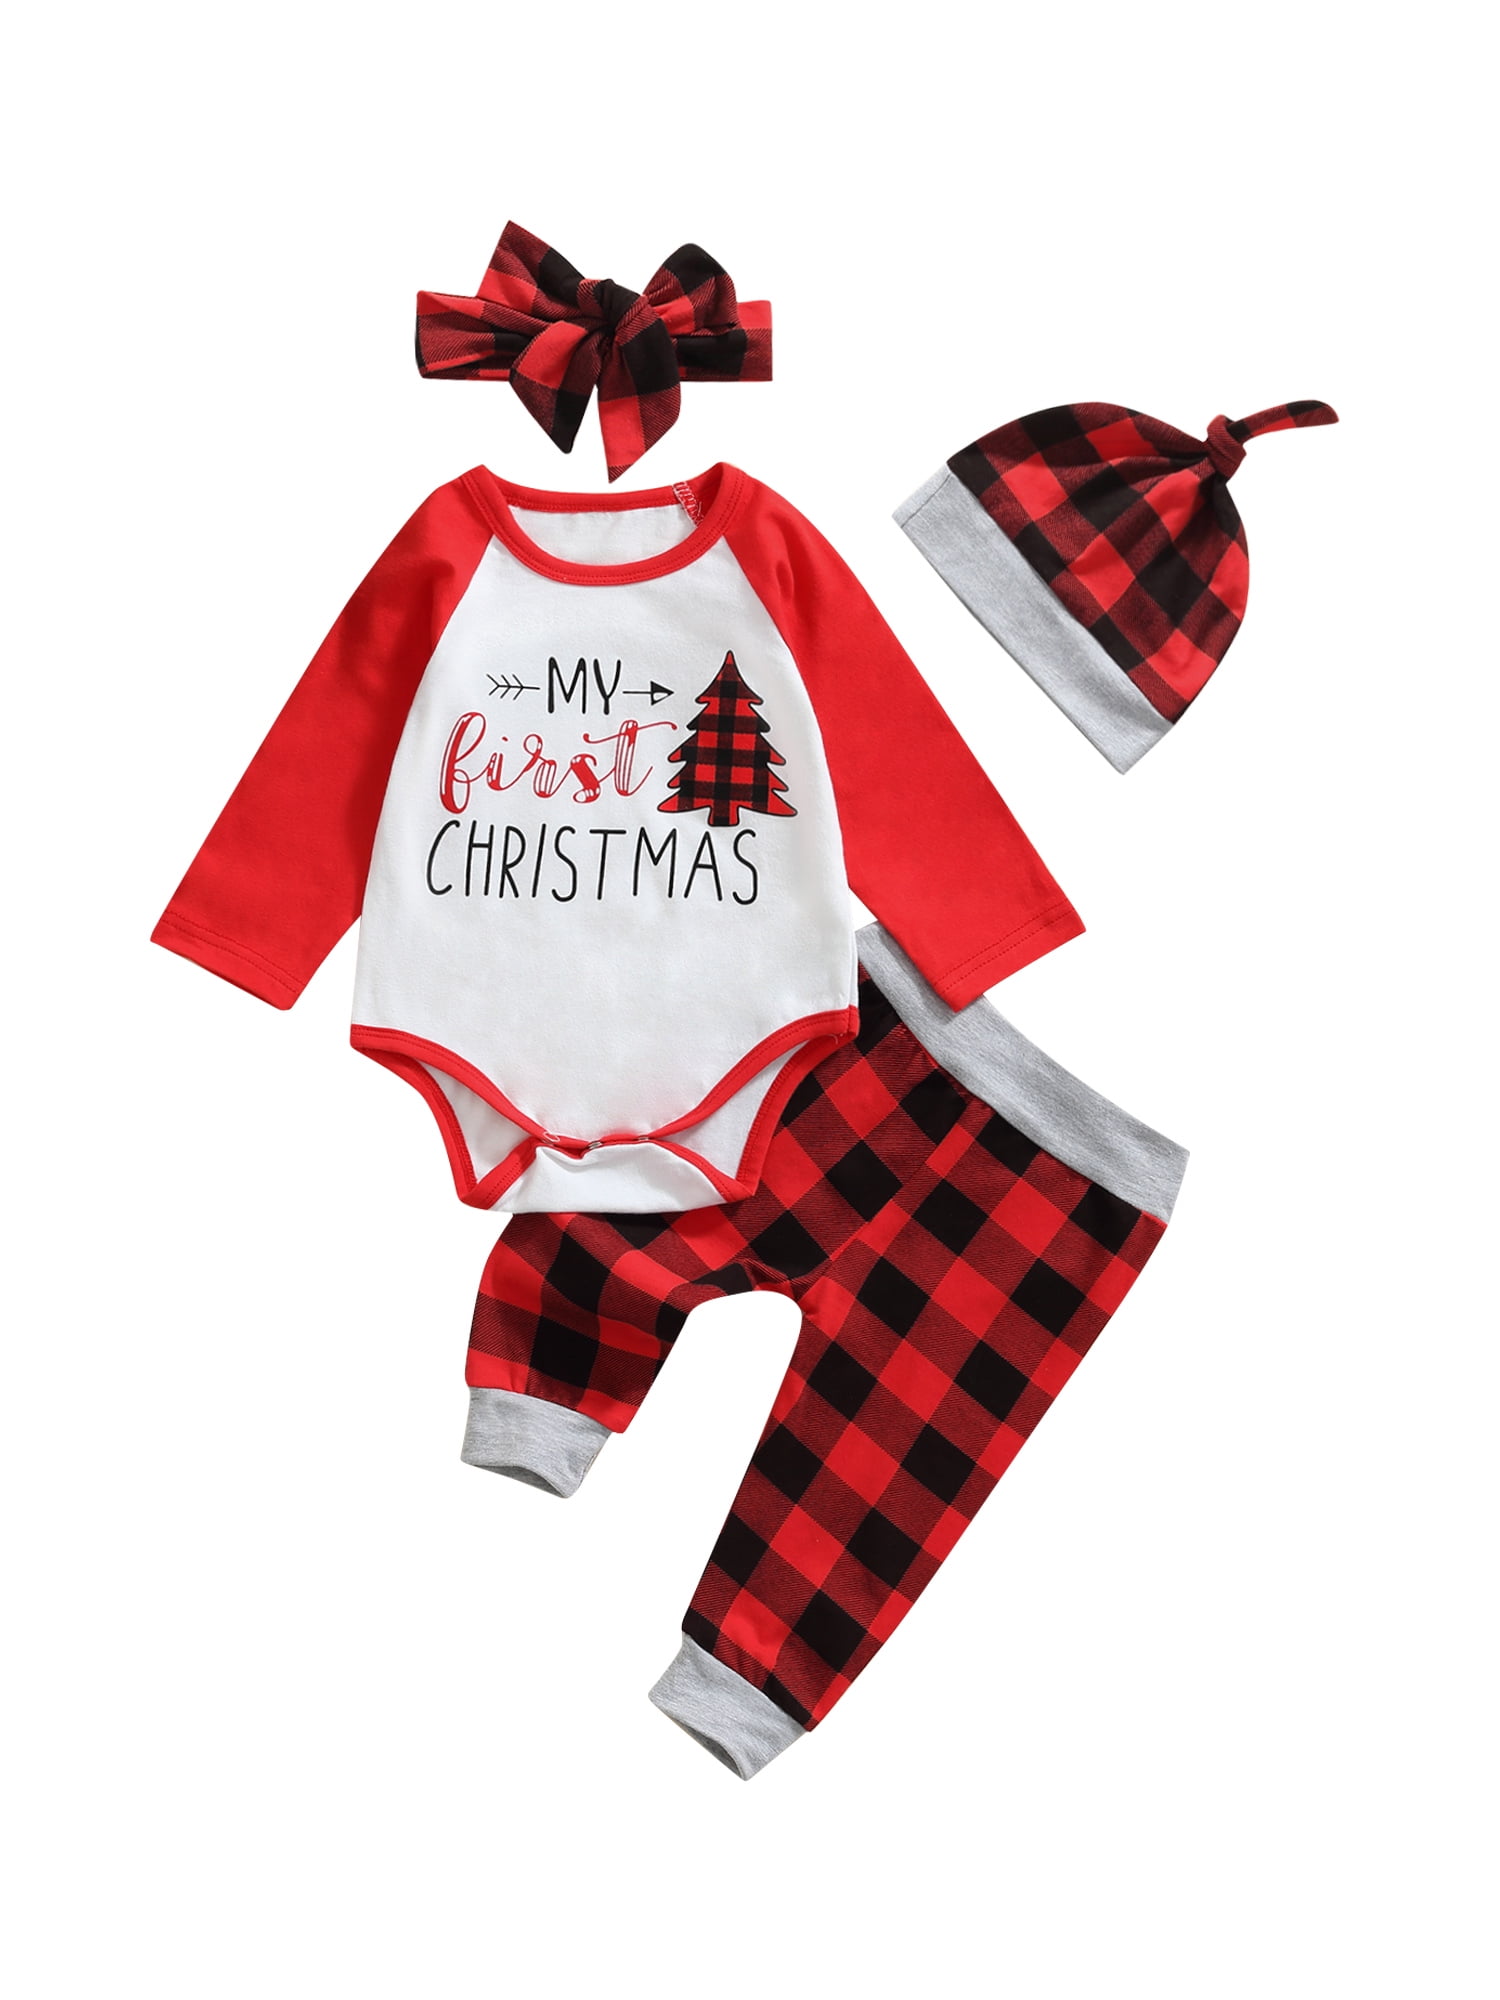 My 1st Christmas Baby Boy Girl Newborn Xmas Clothes Romper+Plaid Pants Outfits 